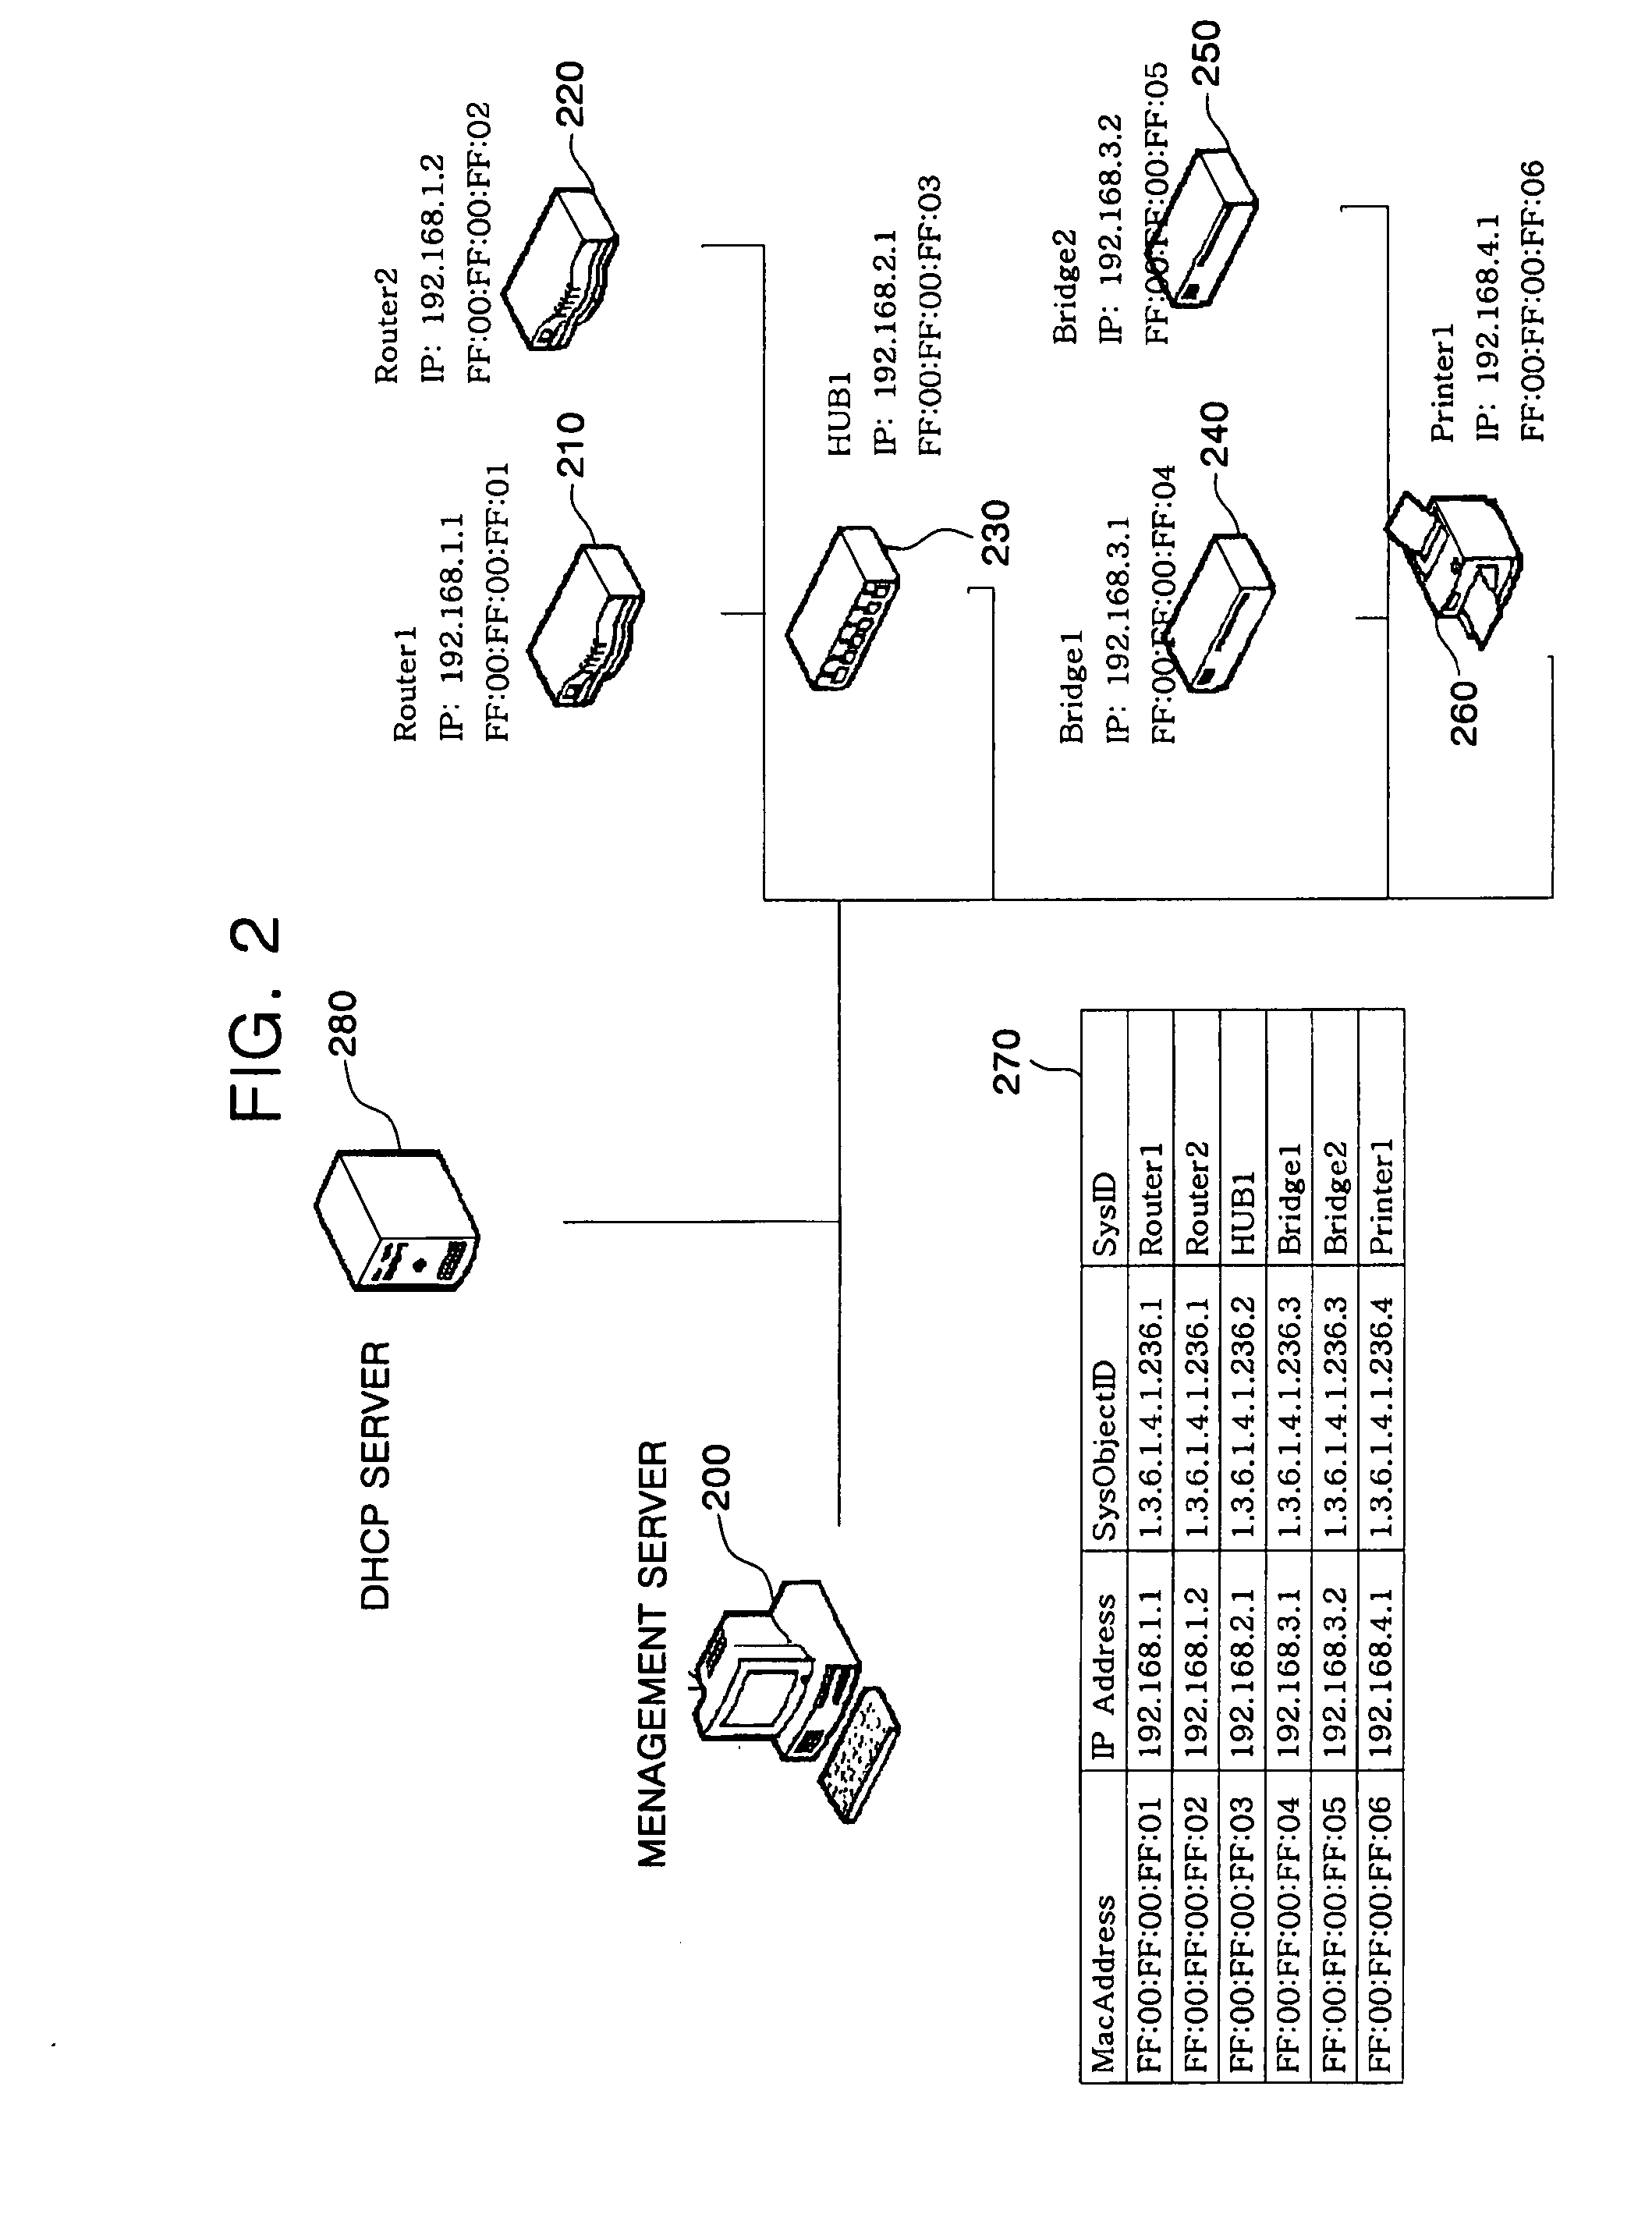 Management system and method of network elements using simple network management protocol